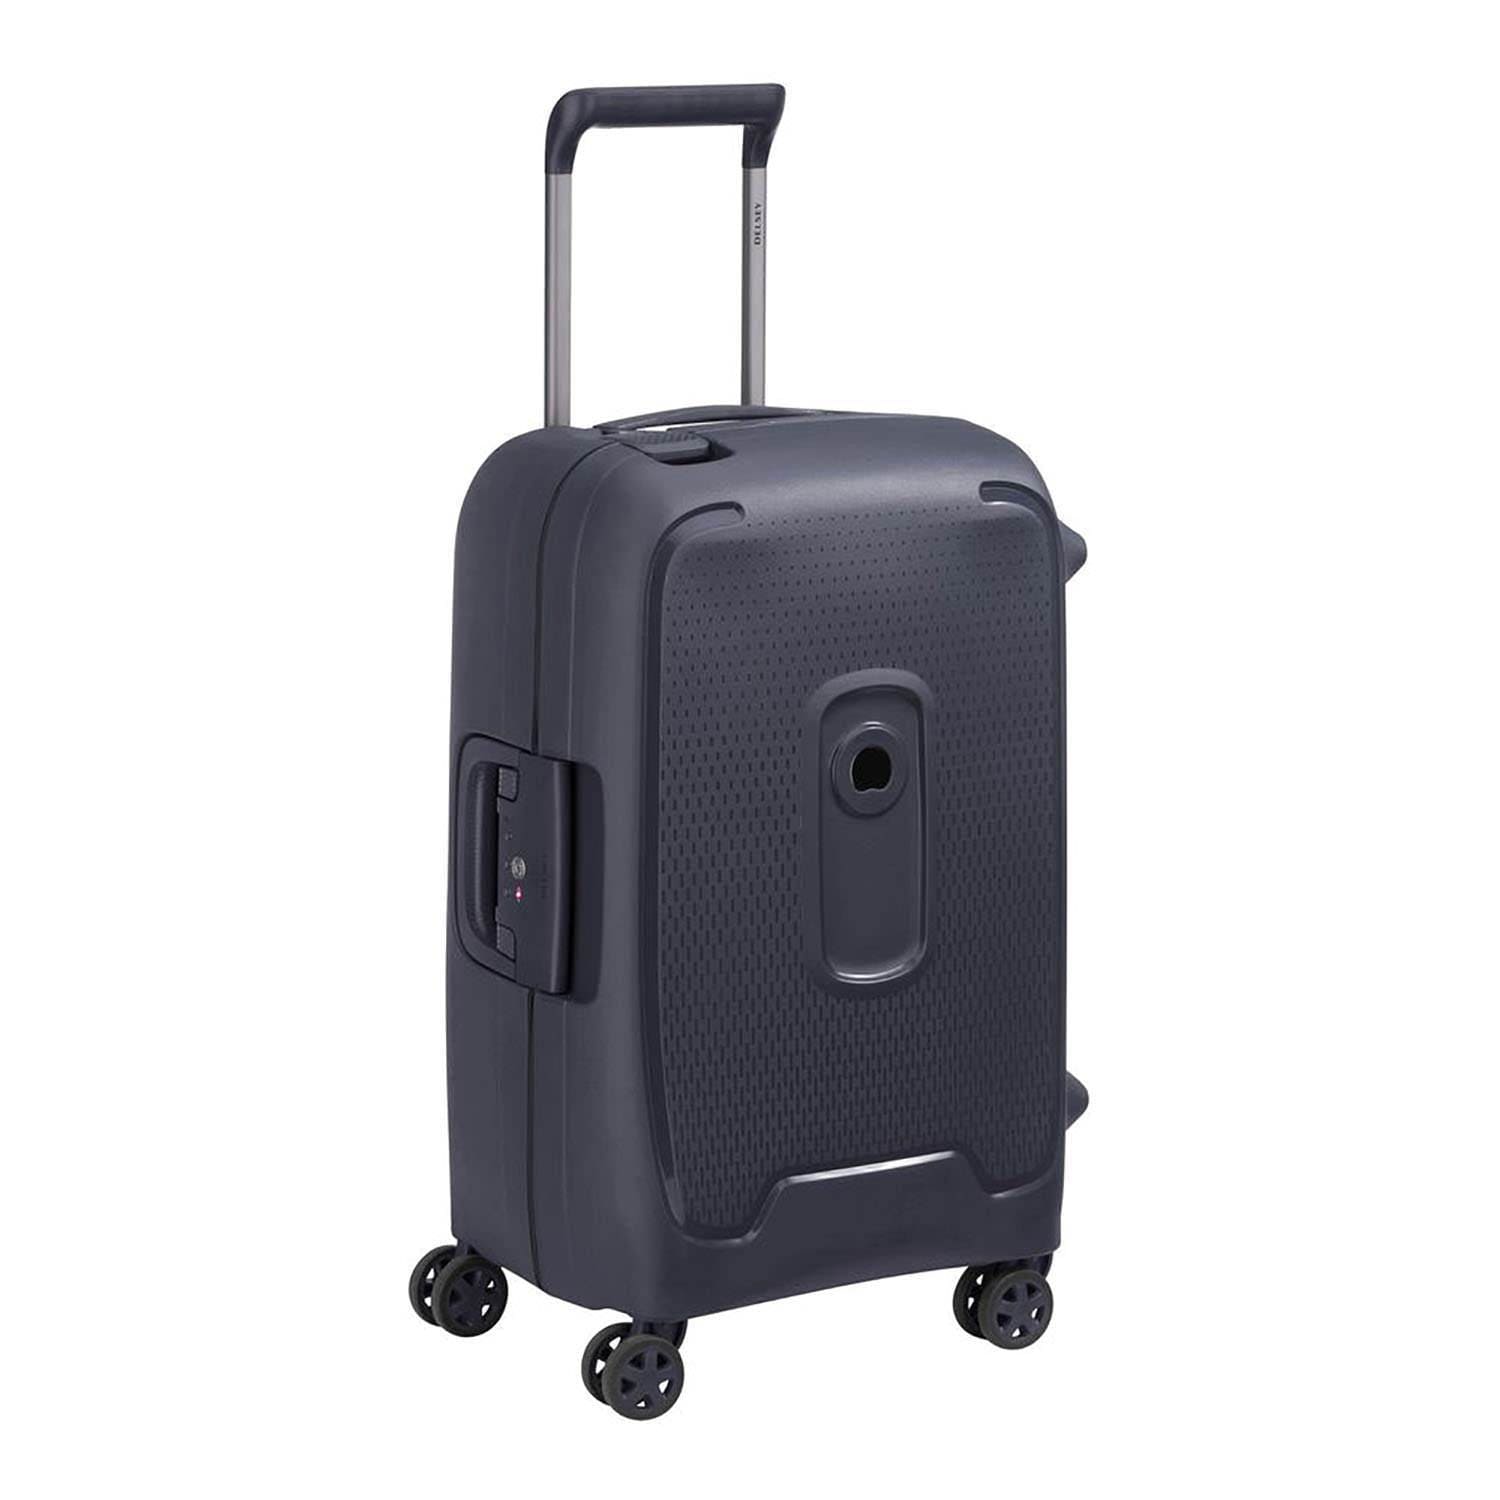 Delsey Moncey 4 Double Wheel Cabin Trolley Case - Anthracite - 00384480101 ANT - Jashanmal Home